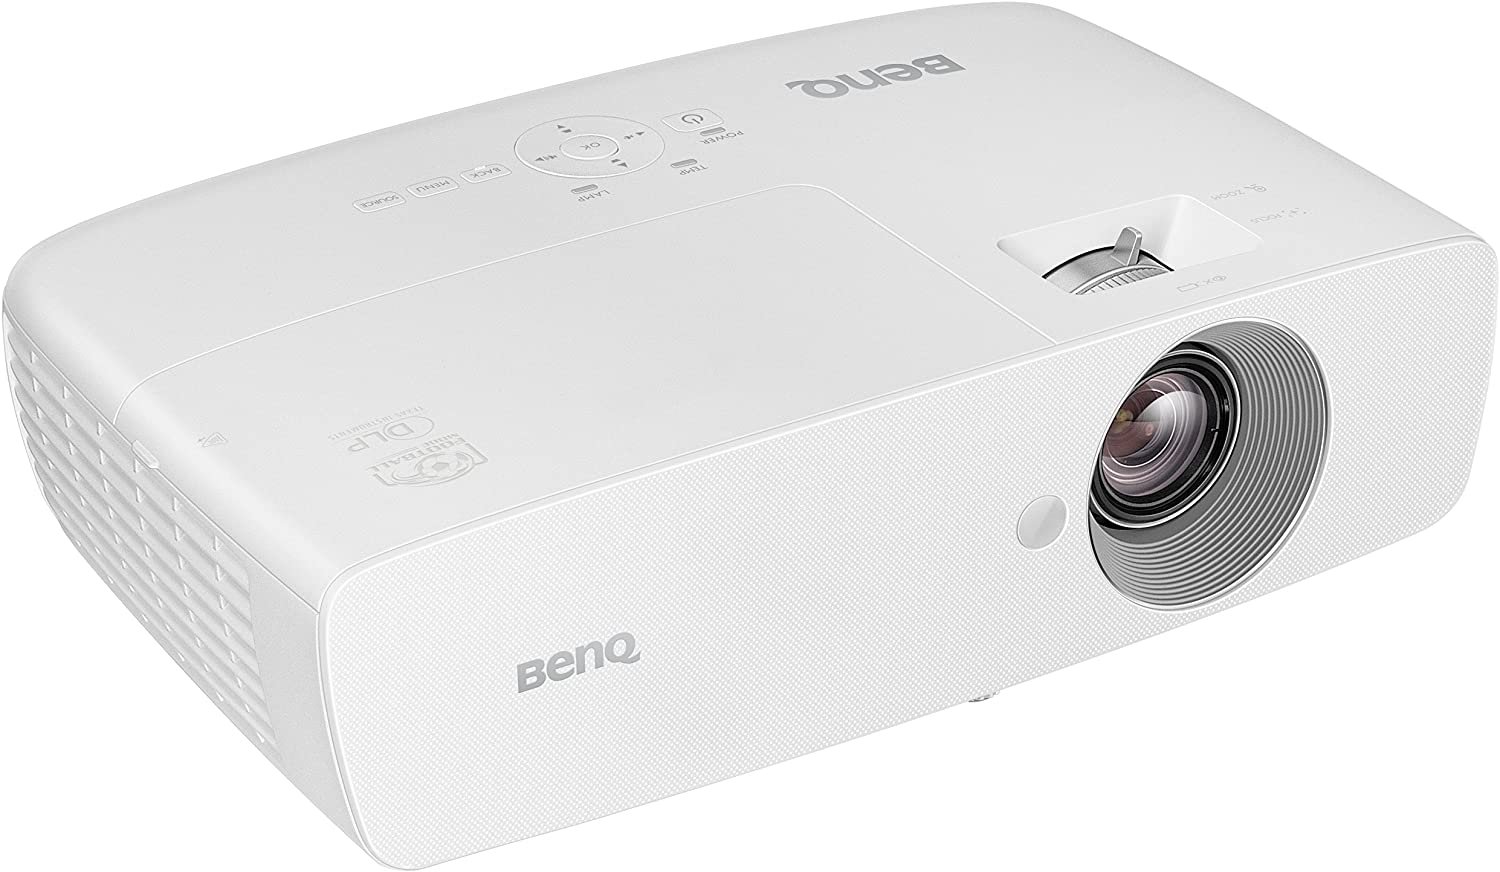 https://technostoreae.com/wp-content/uploads/2020/12/benq-w1090-ht1070-with-2000l-fhd-lamp-residential-cine-home-cine-series-projector201.jpg